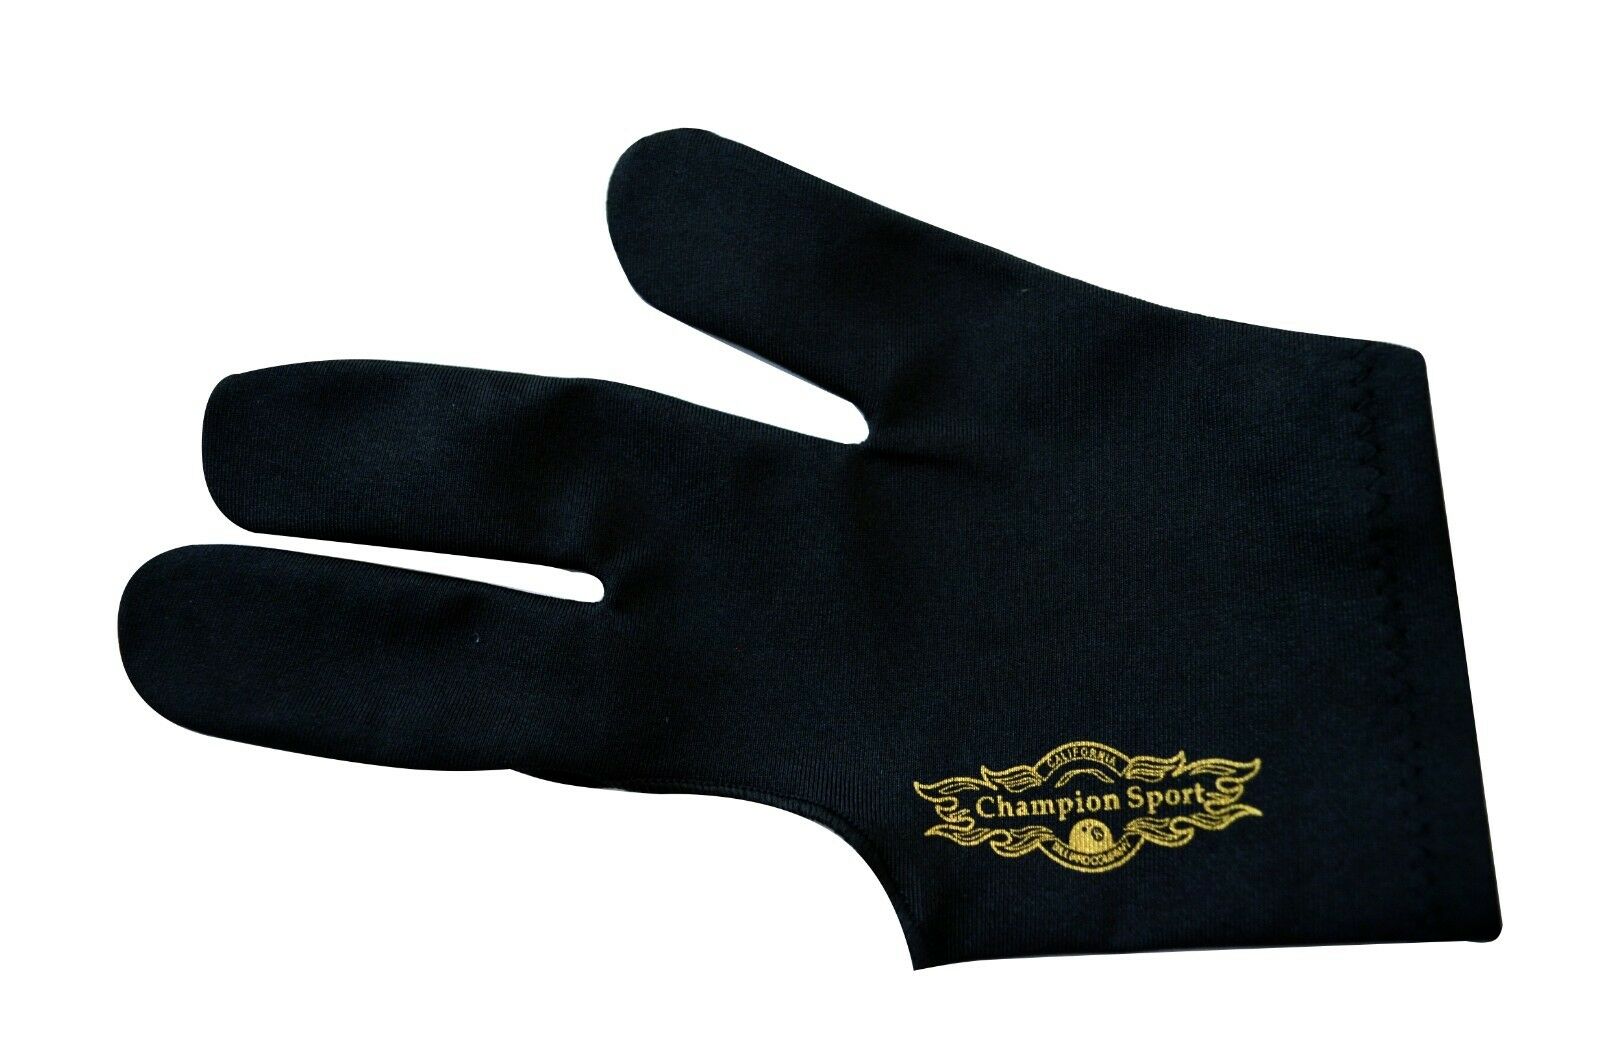 Brand New Black Xl Champion Pool Cue Glove For Stick, Free Shipping